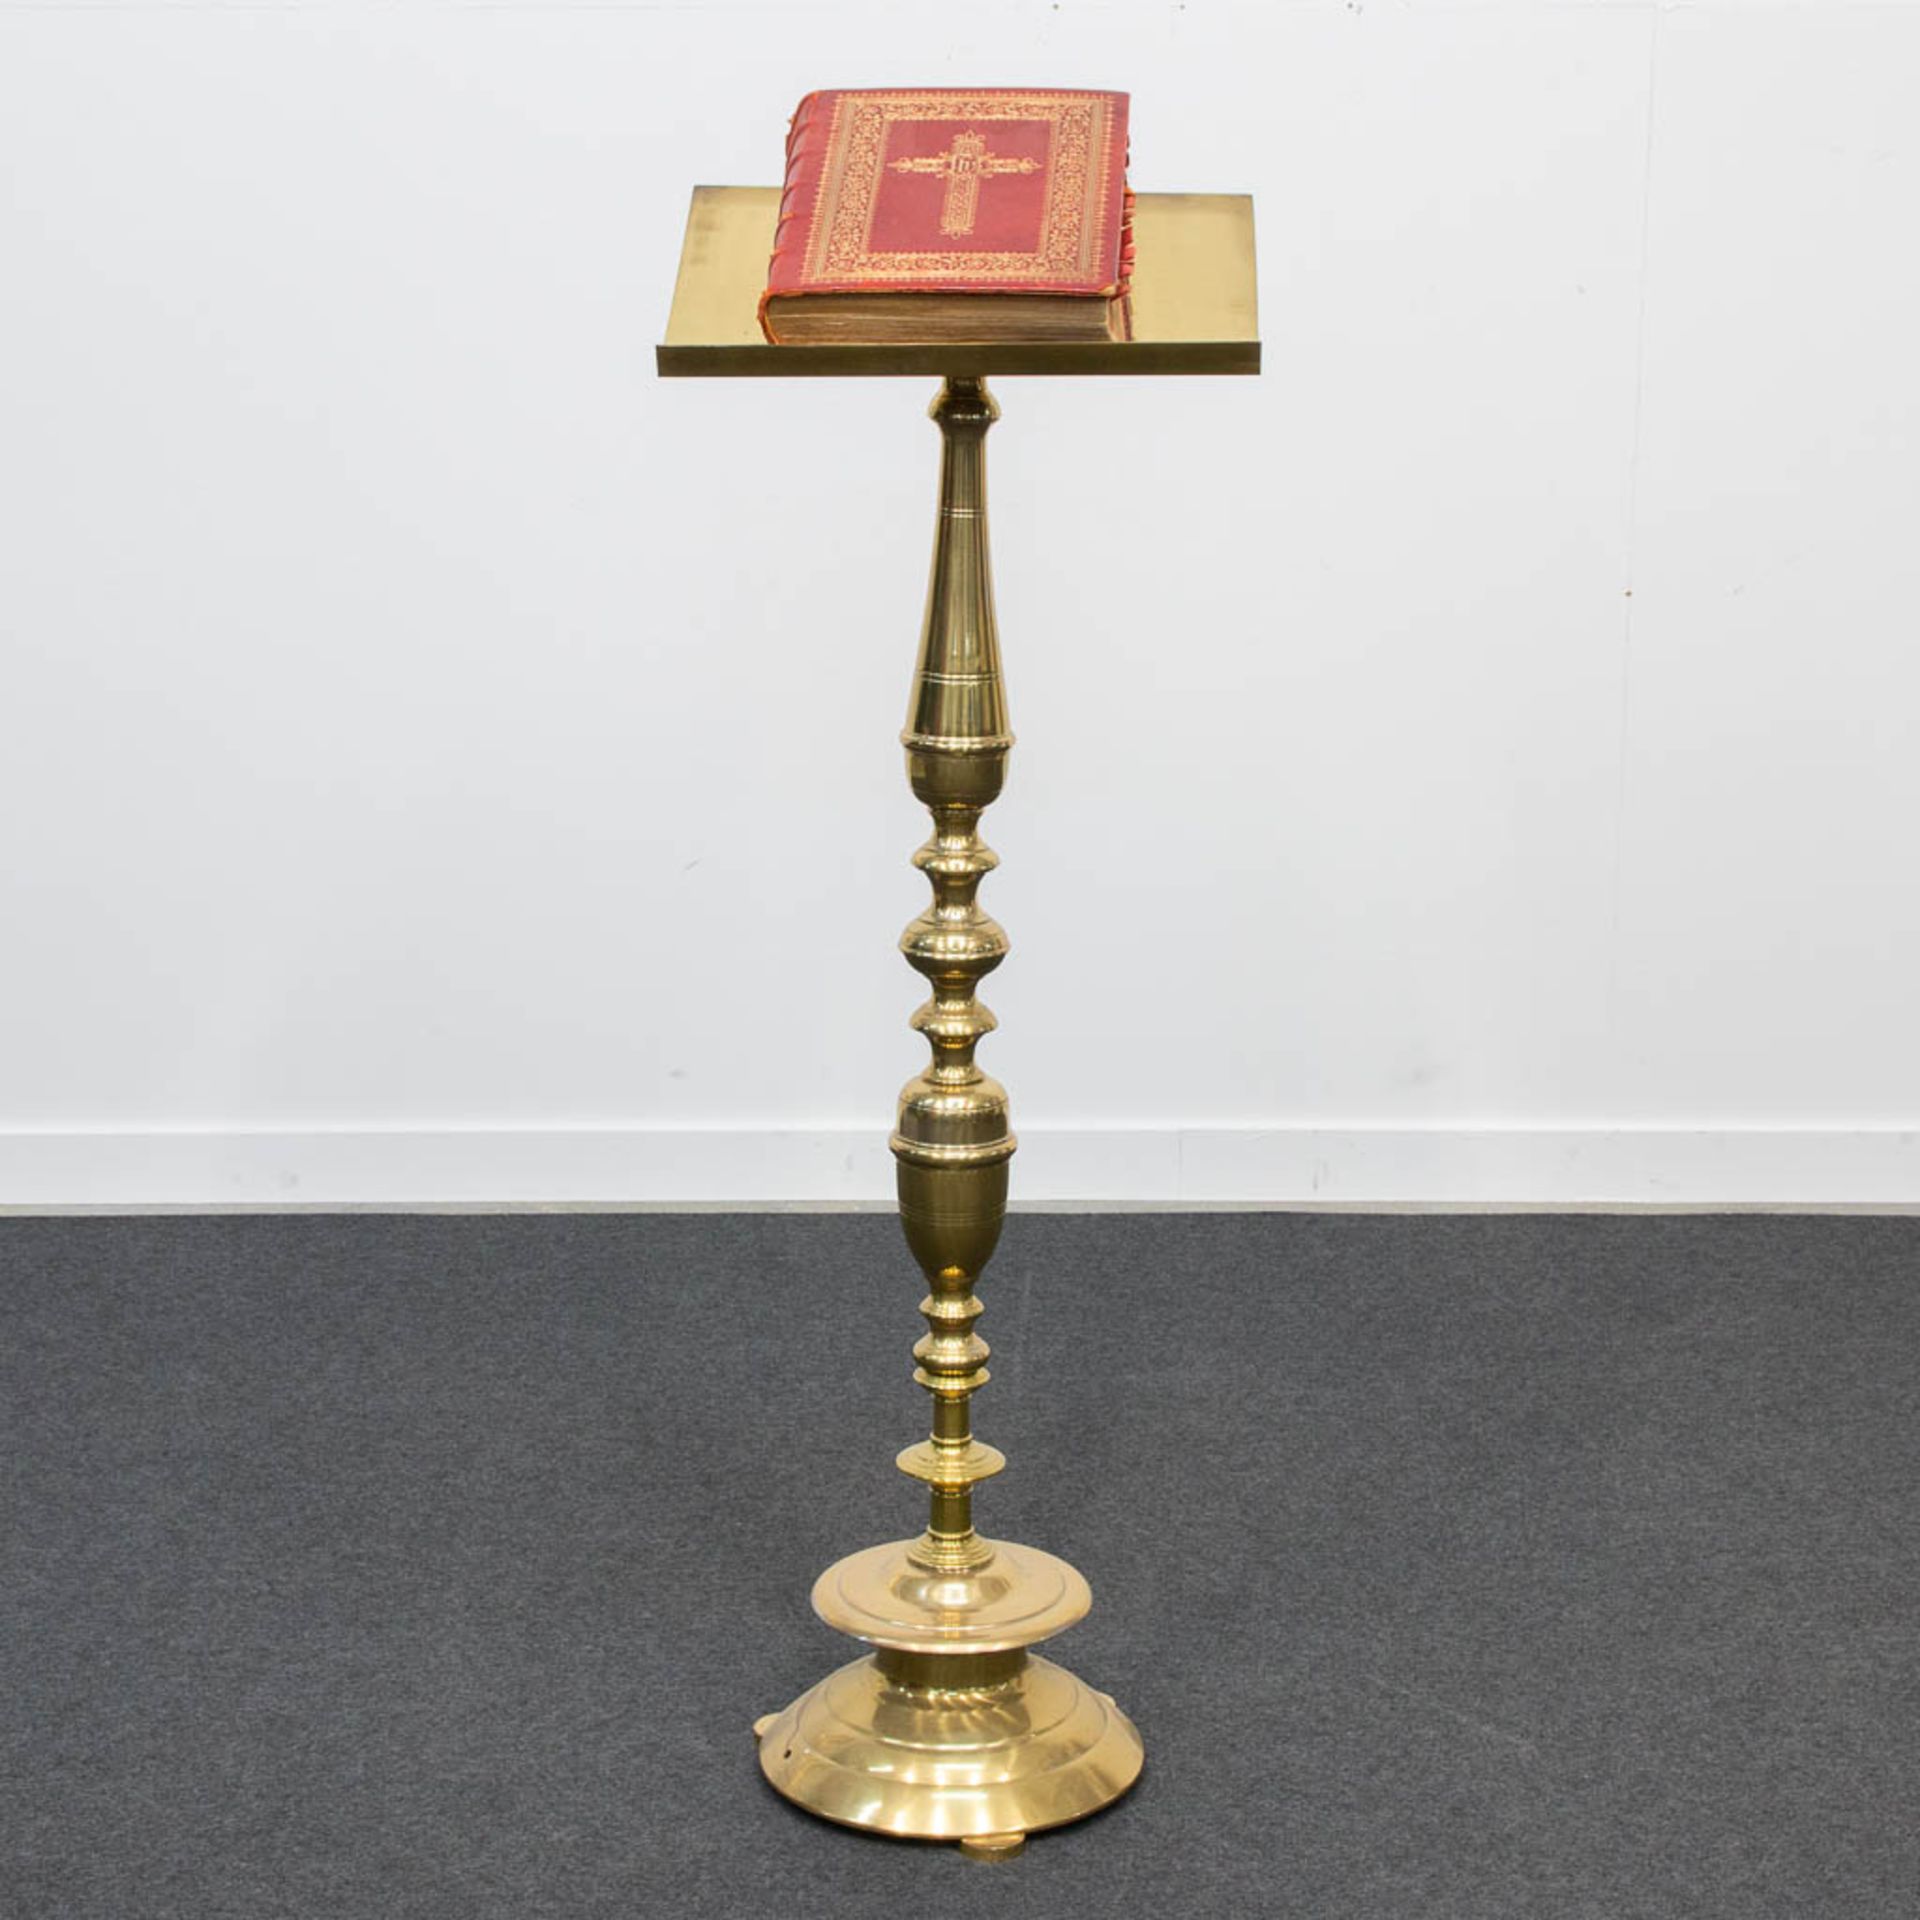 A Bronze standing lectern for church, combined with a Missale Romanum church book.